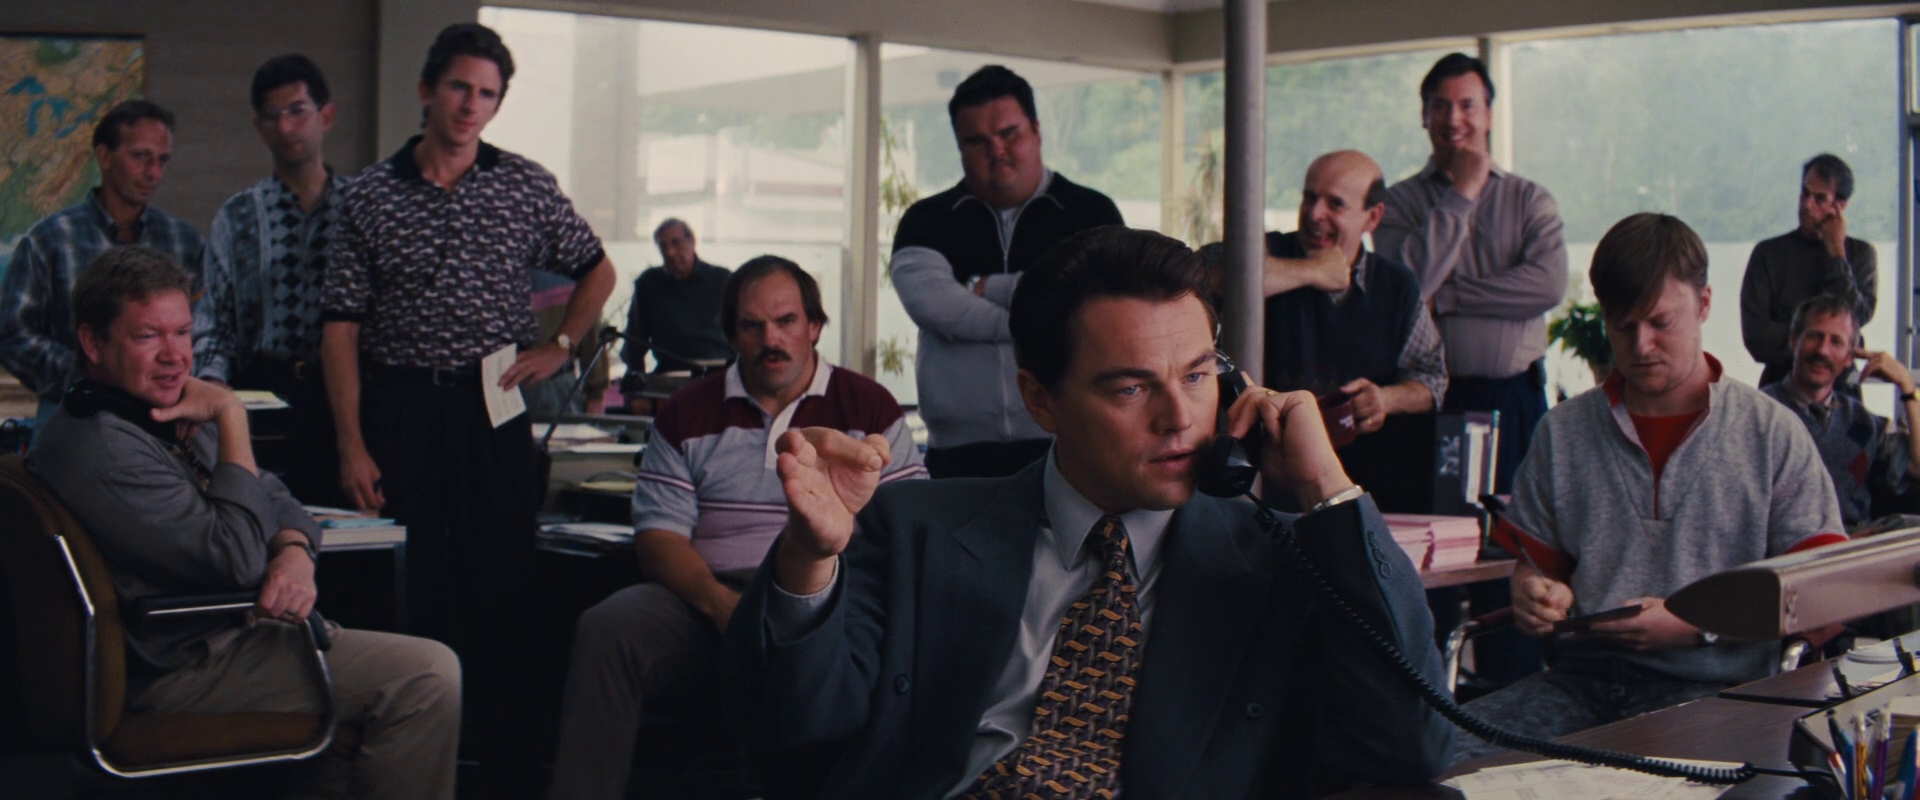 Movie The Wolf of Wall Street Wallpaper